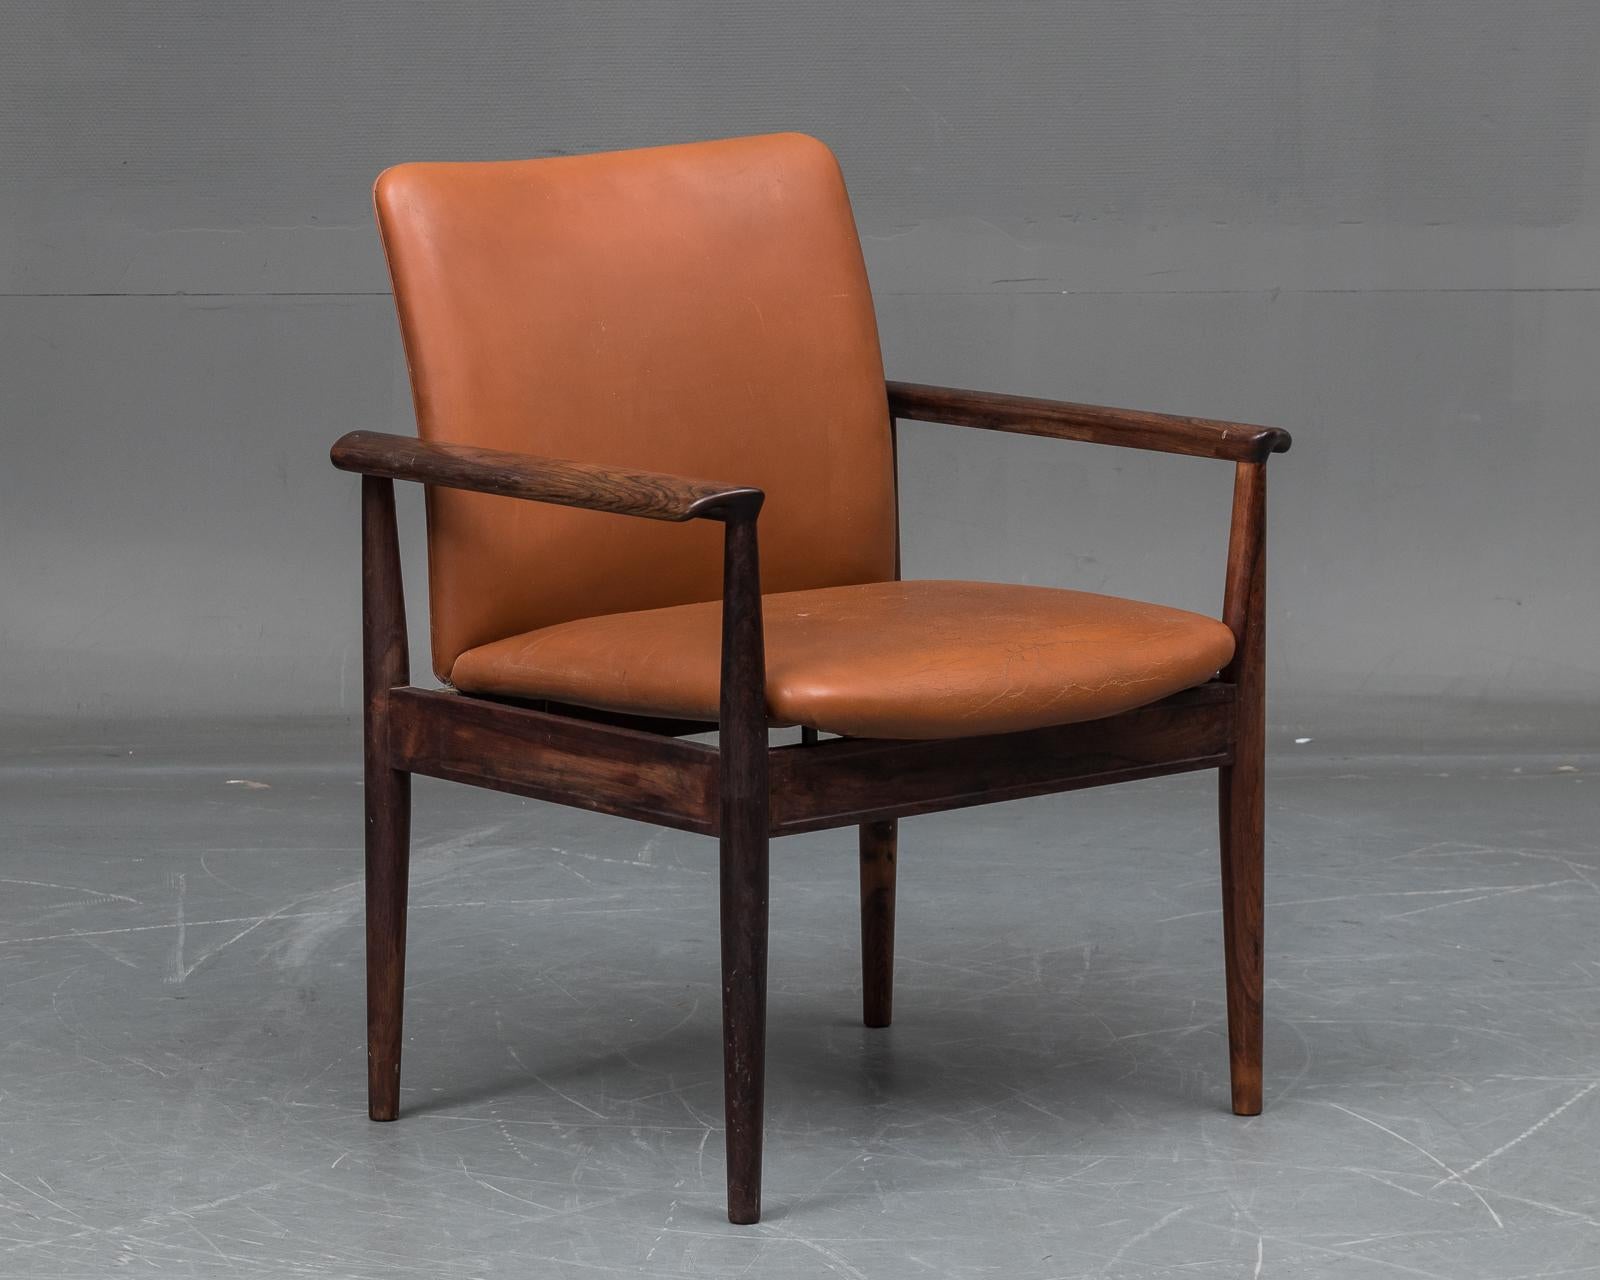 Finn Juhl, diplomat desk chair or armchair with frame in solid hardwood, seat and backrest upholstered, model 209. Designed in 1963. Produced by France & Son.
Measures: H. 82 cm, SH. 44 cm, B. 69 cm.
Used but still in a good condition.
 